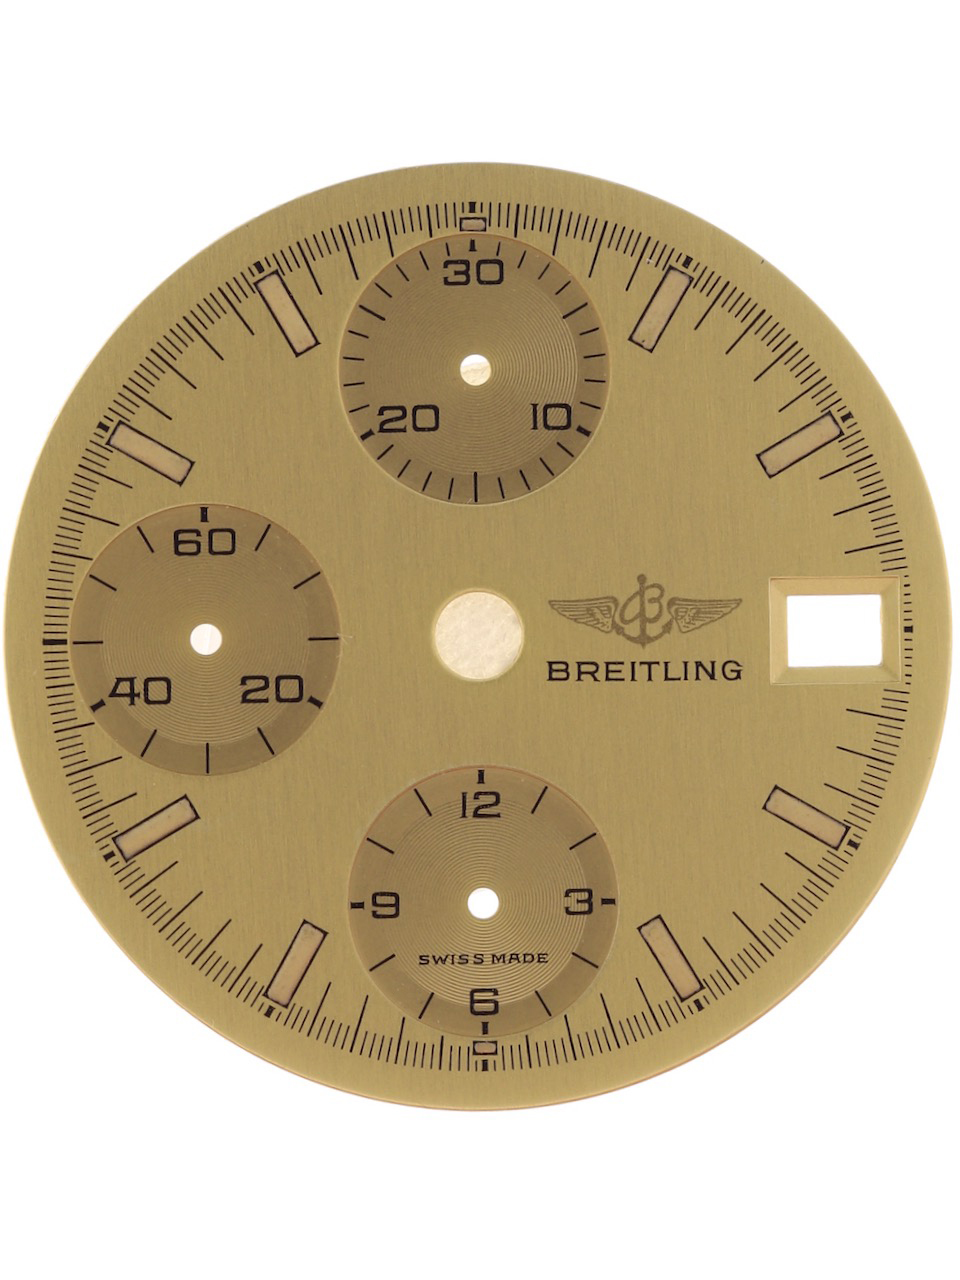 Breitling Chronograph Date 1990s